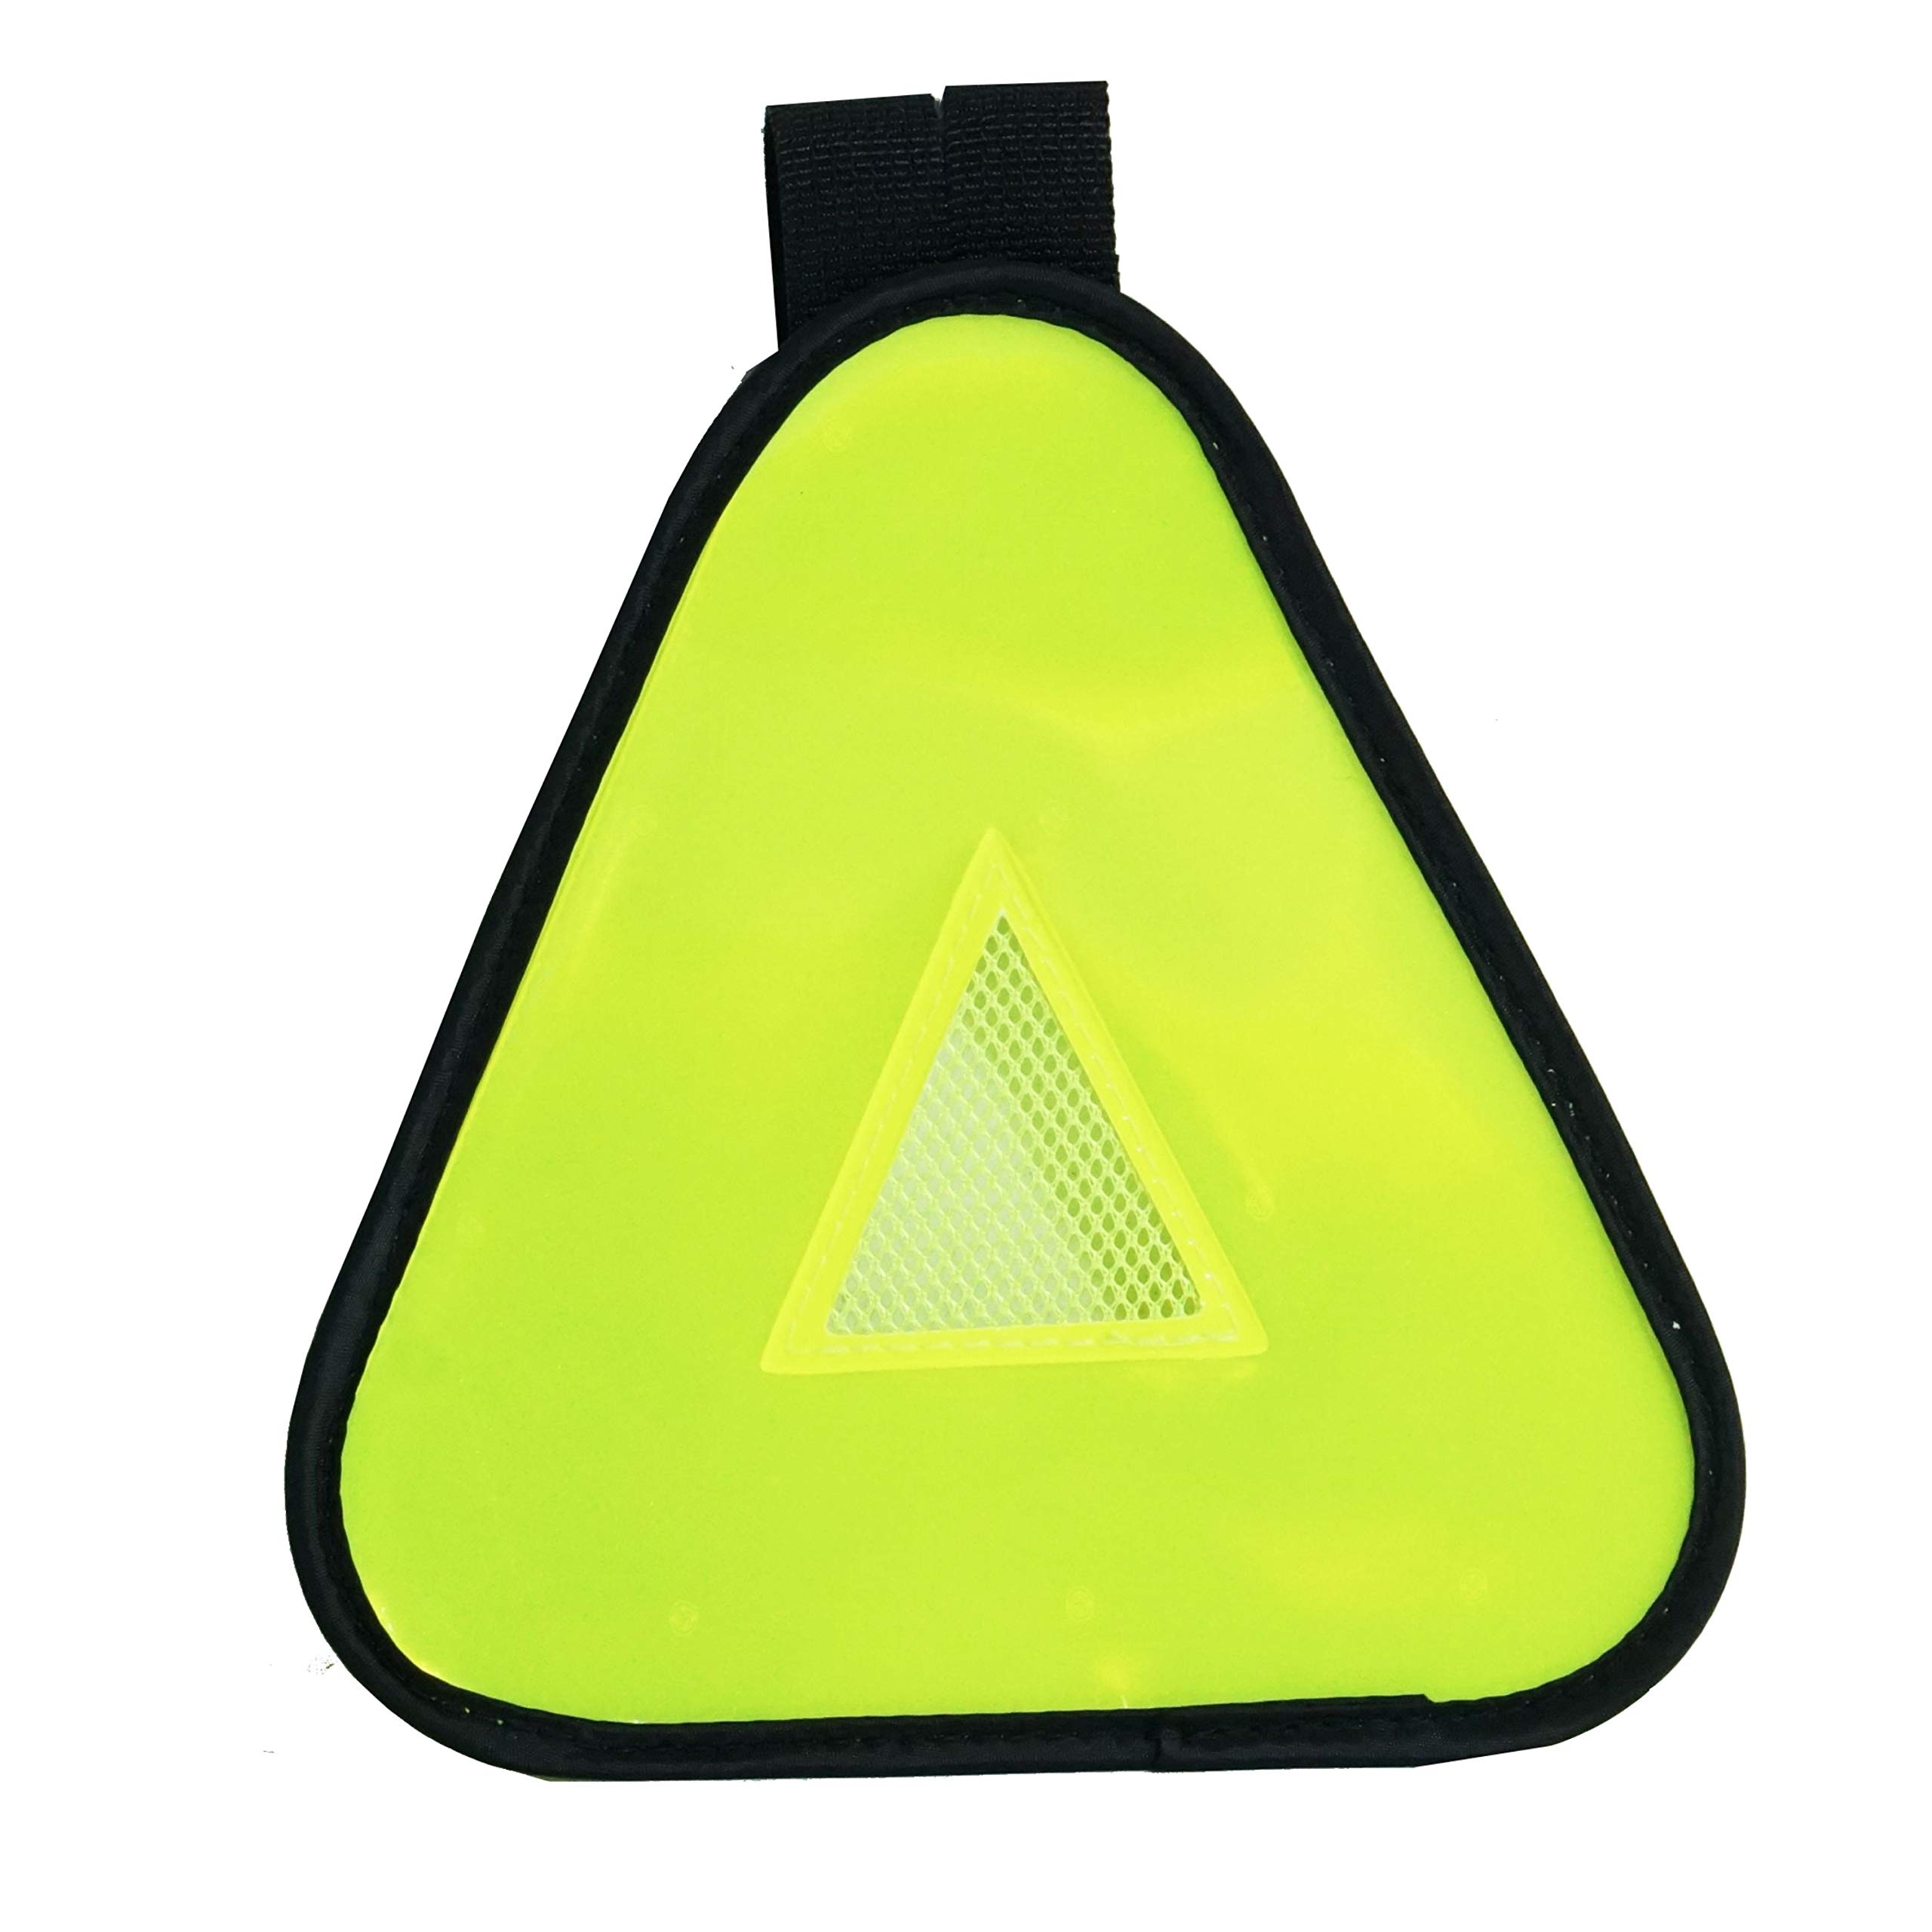 Vincita Reflective Yield Symbol with Velcro Strap - High Visibility for Safety at Night - Safety Reflector for Bike Rack, Backpack, Car Rack - Bicycle Reflective Accessories